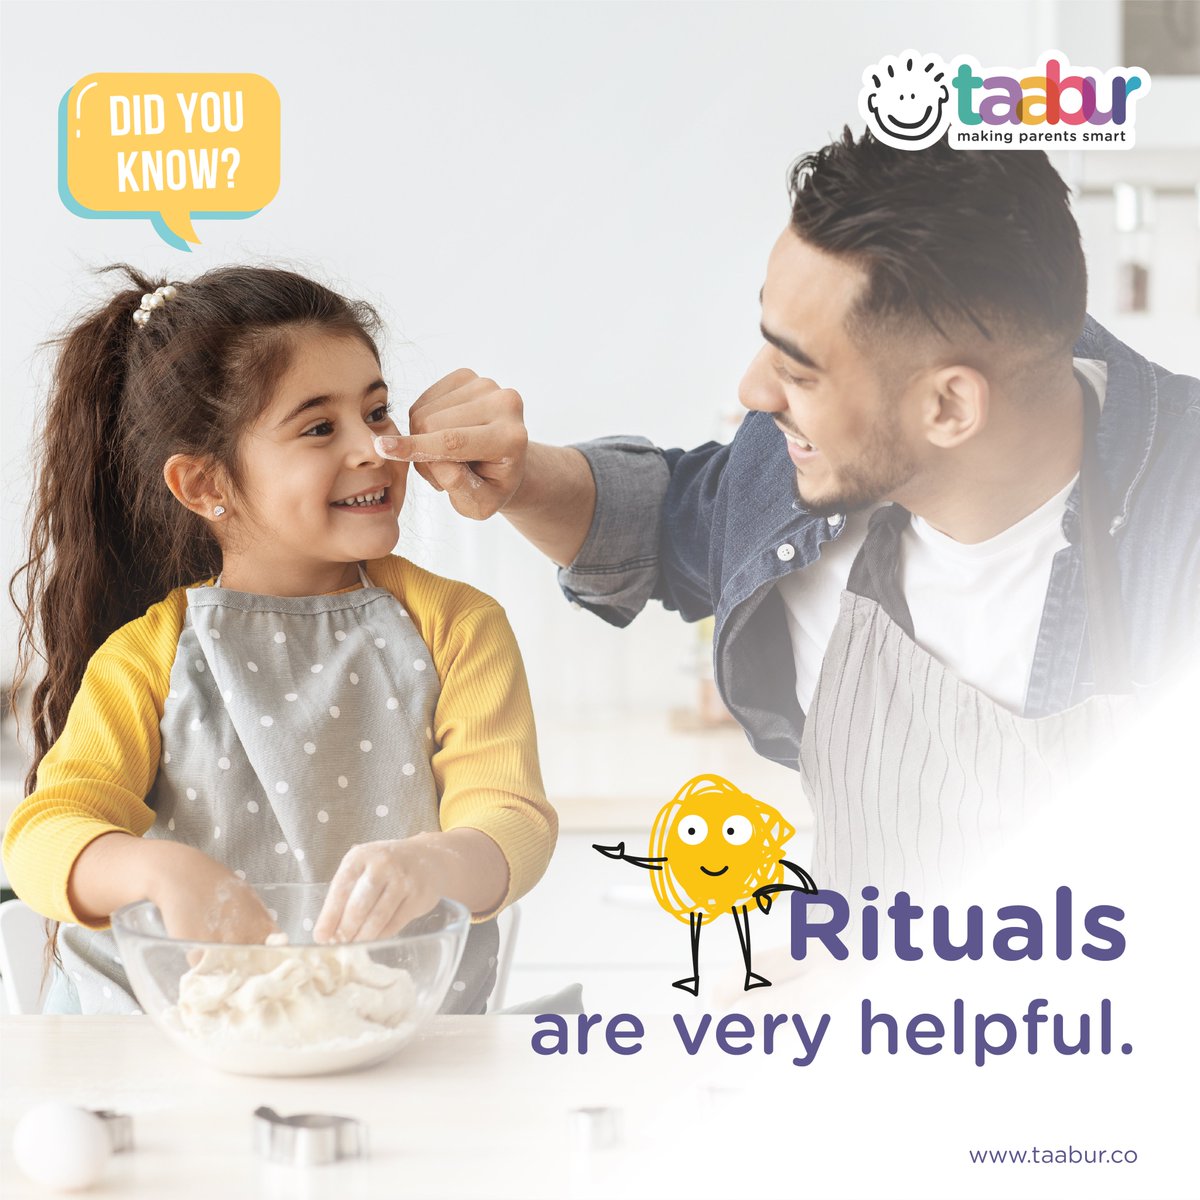 Have rituals together as a family. It not only strengthens family ties but also builds a sense of care and respect. 

#kidsrituals #rituals #didyouknowfacts #kidsbehavior #goodparenting #taabur #childdevelopment #makingparentssmart #kidsclasses #kidsonlineclasses